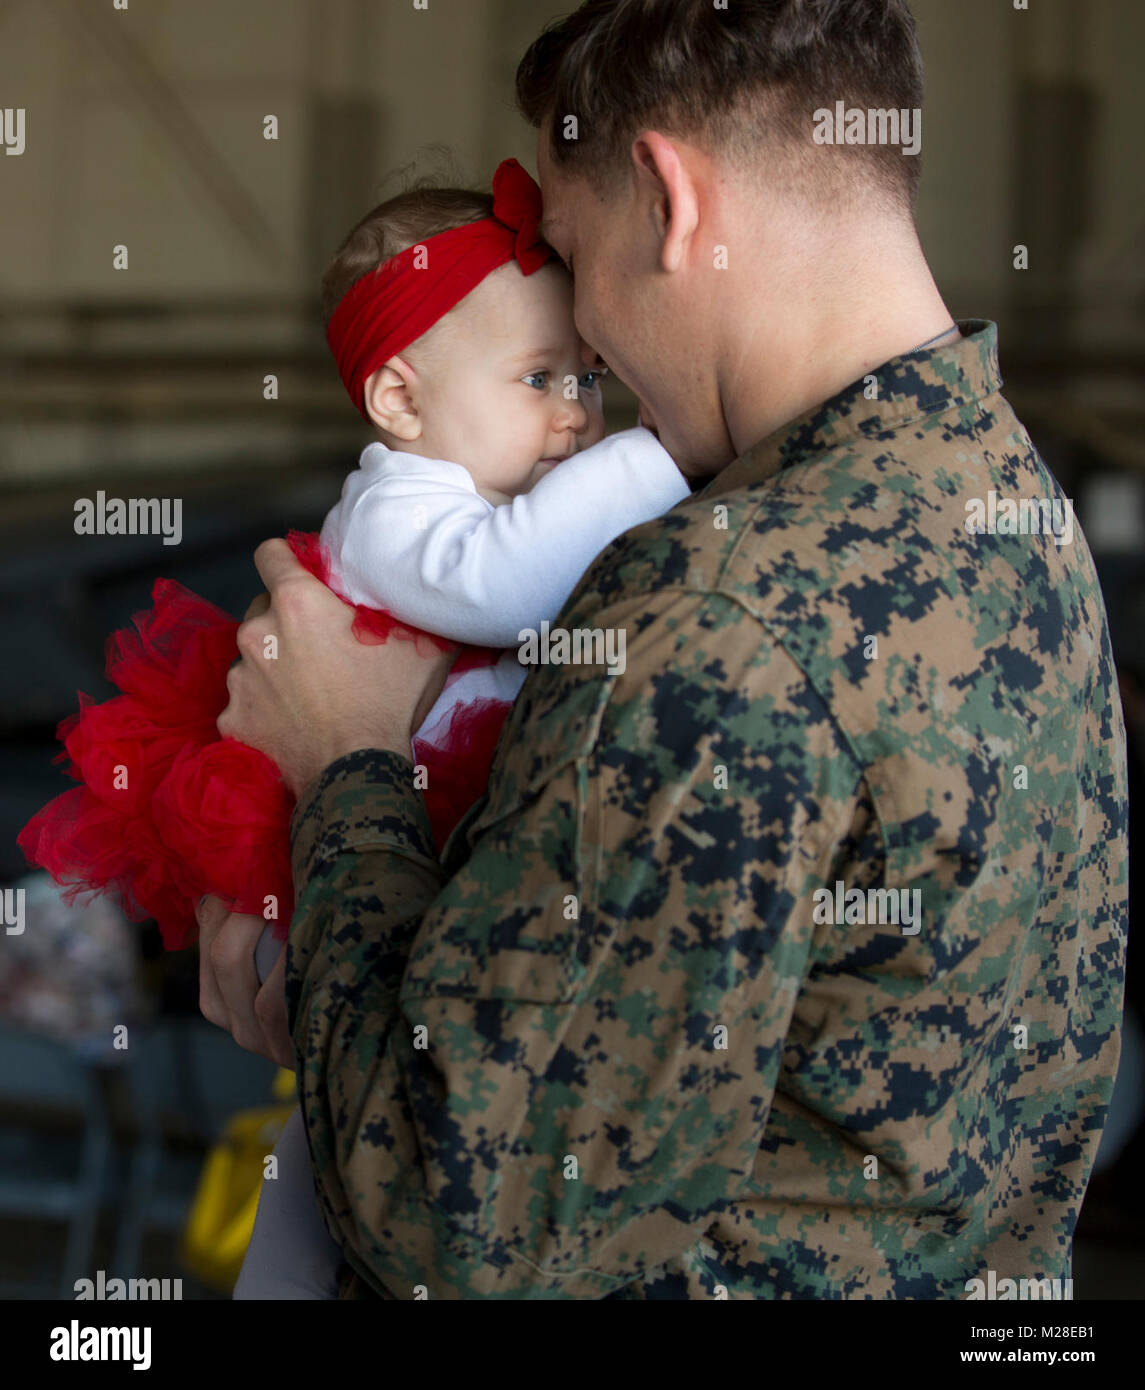 U.S. Marines with Marine Attack Squadron (VMA) 214, 3rd Marine Aircraft Wing, reunite with their friends and family in the squadron's hangar at Marine Corps Air Station Yuma, Ariz., after returing from a seven-month deployment with the 15th Marine Expeditionary Unit (MEU), Jan. 31, 2018. The Marines embarked with the 15th MEU and conducted maritime security operations and multiple military-to-military exchanges with partner nations in support of regional security, stability and the free flow of maritime commerce in the Indo-Asia-Pacific and Middle East regions. (U.S. Marine Corps Stock Photo